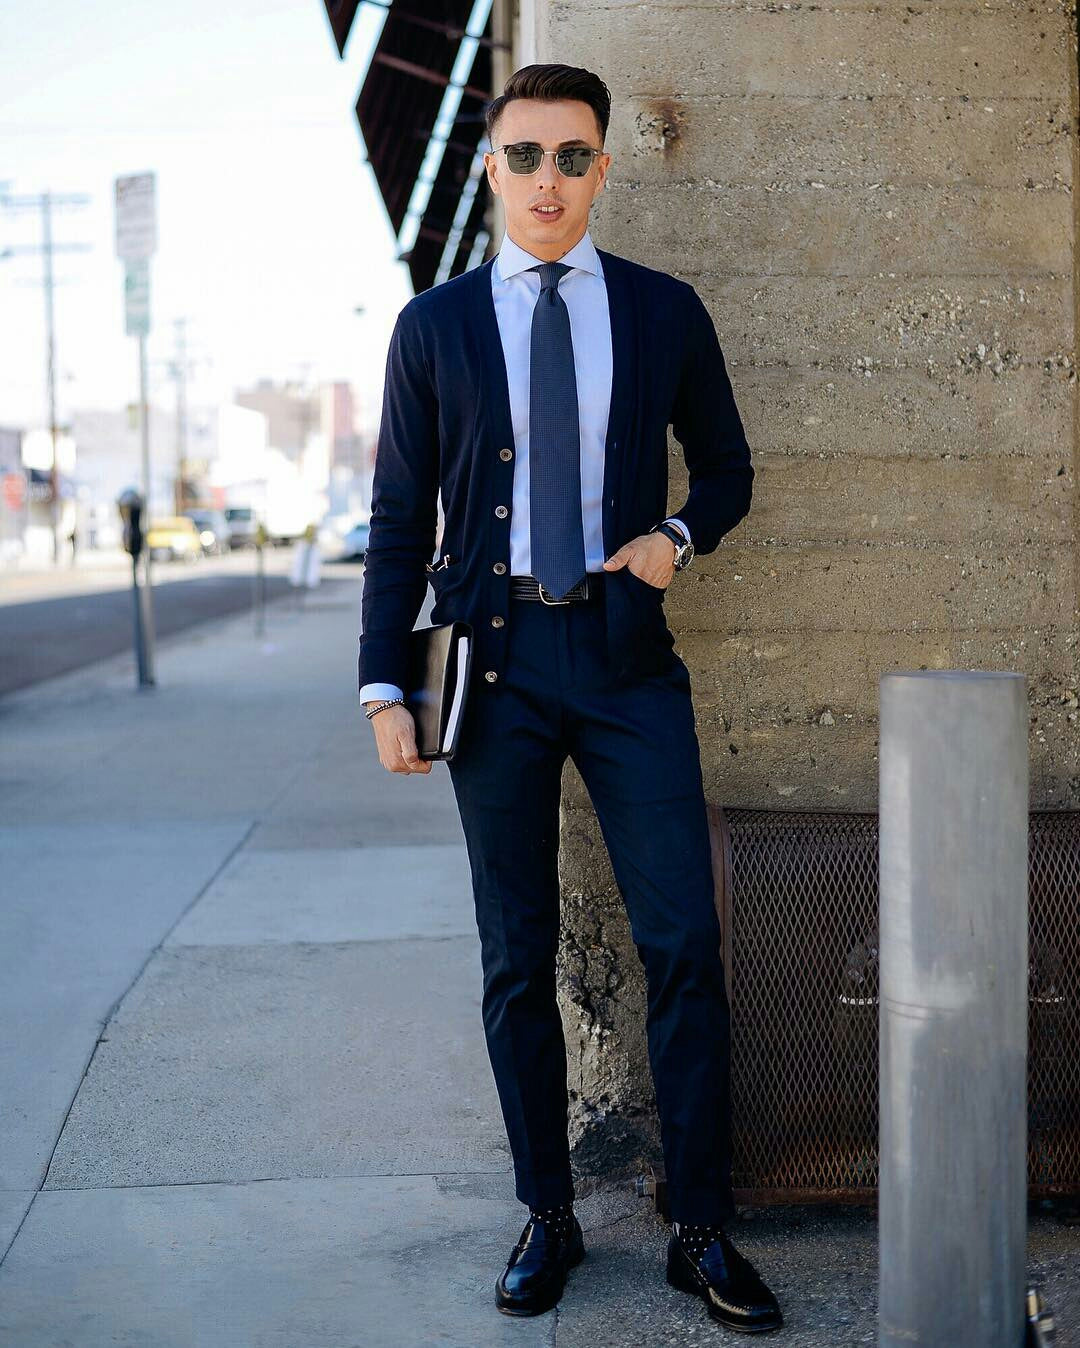 11 Amazing Work Outfit Ideas For Men – LIFESTYLE BY PS